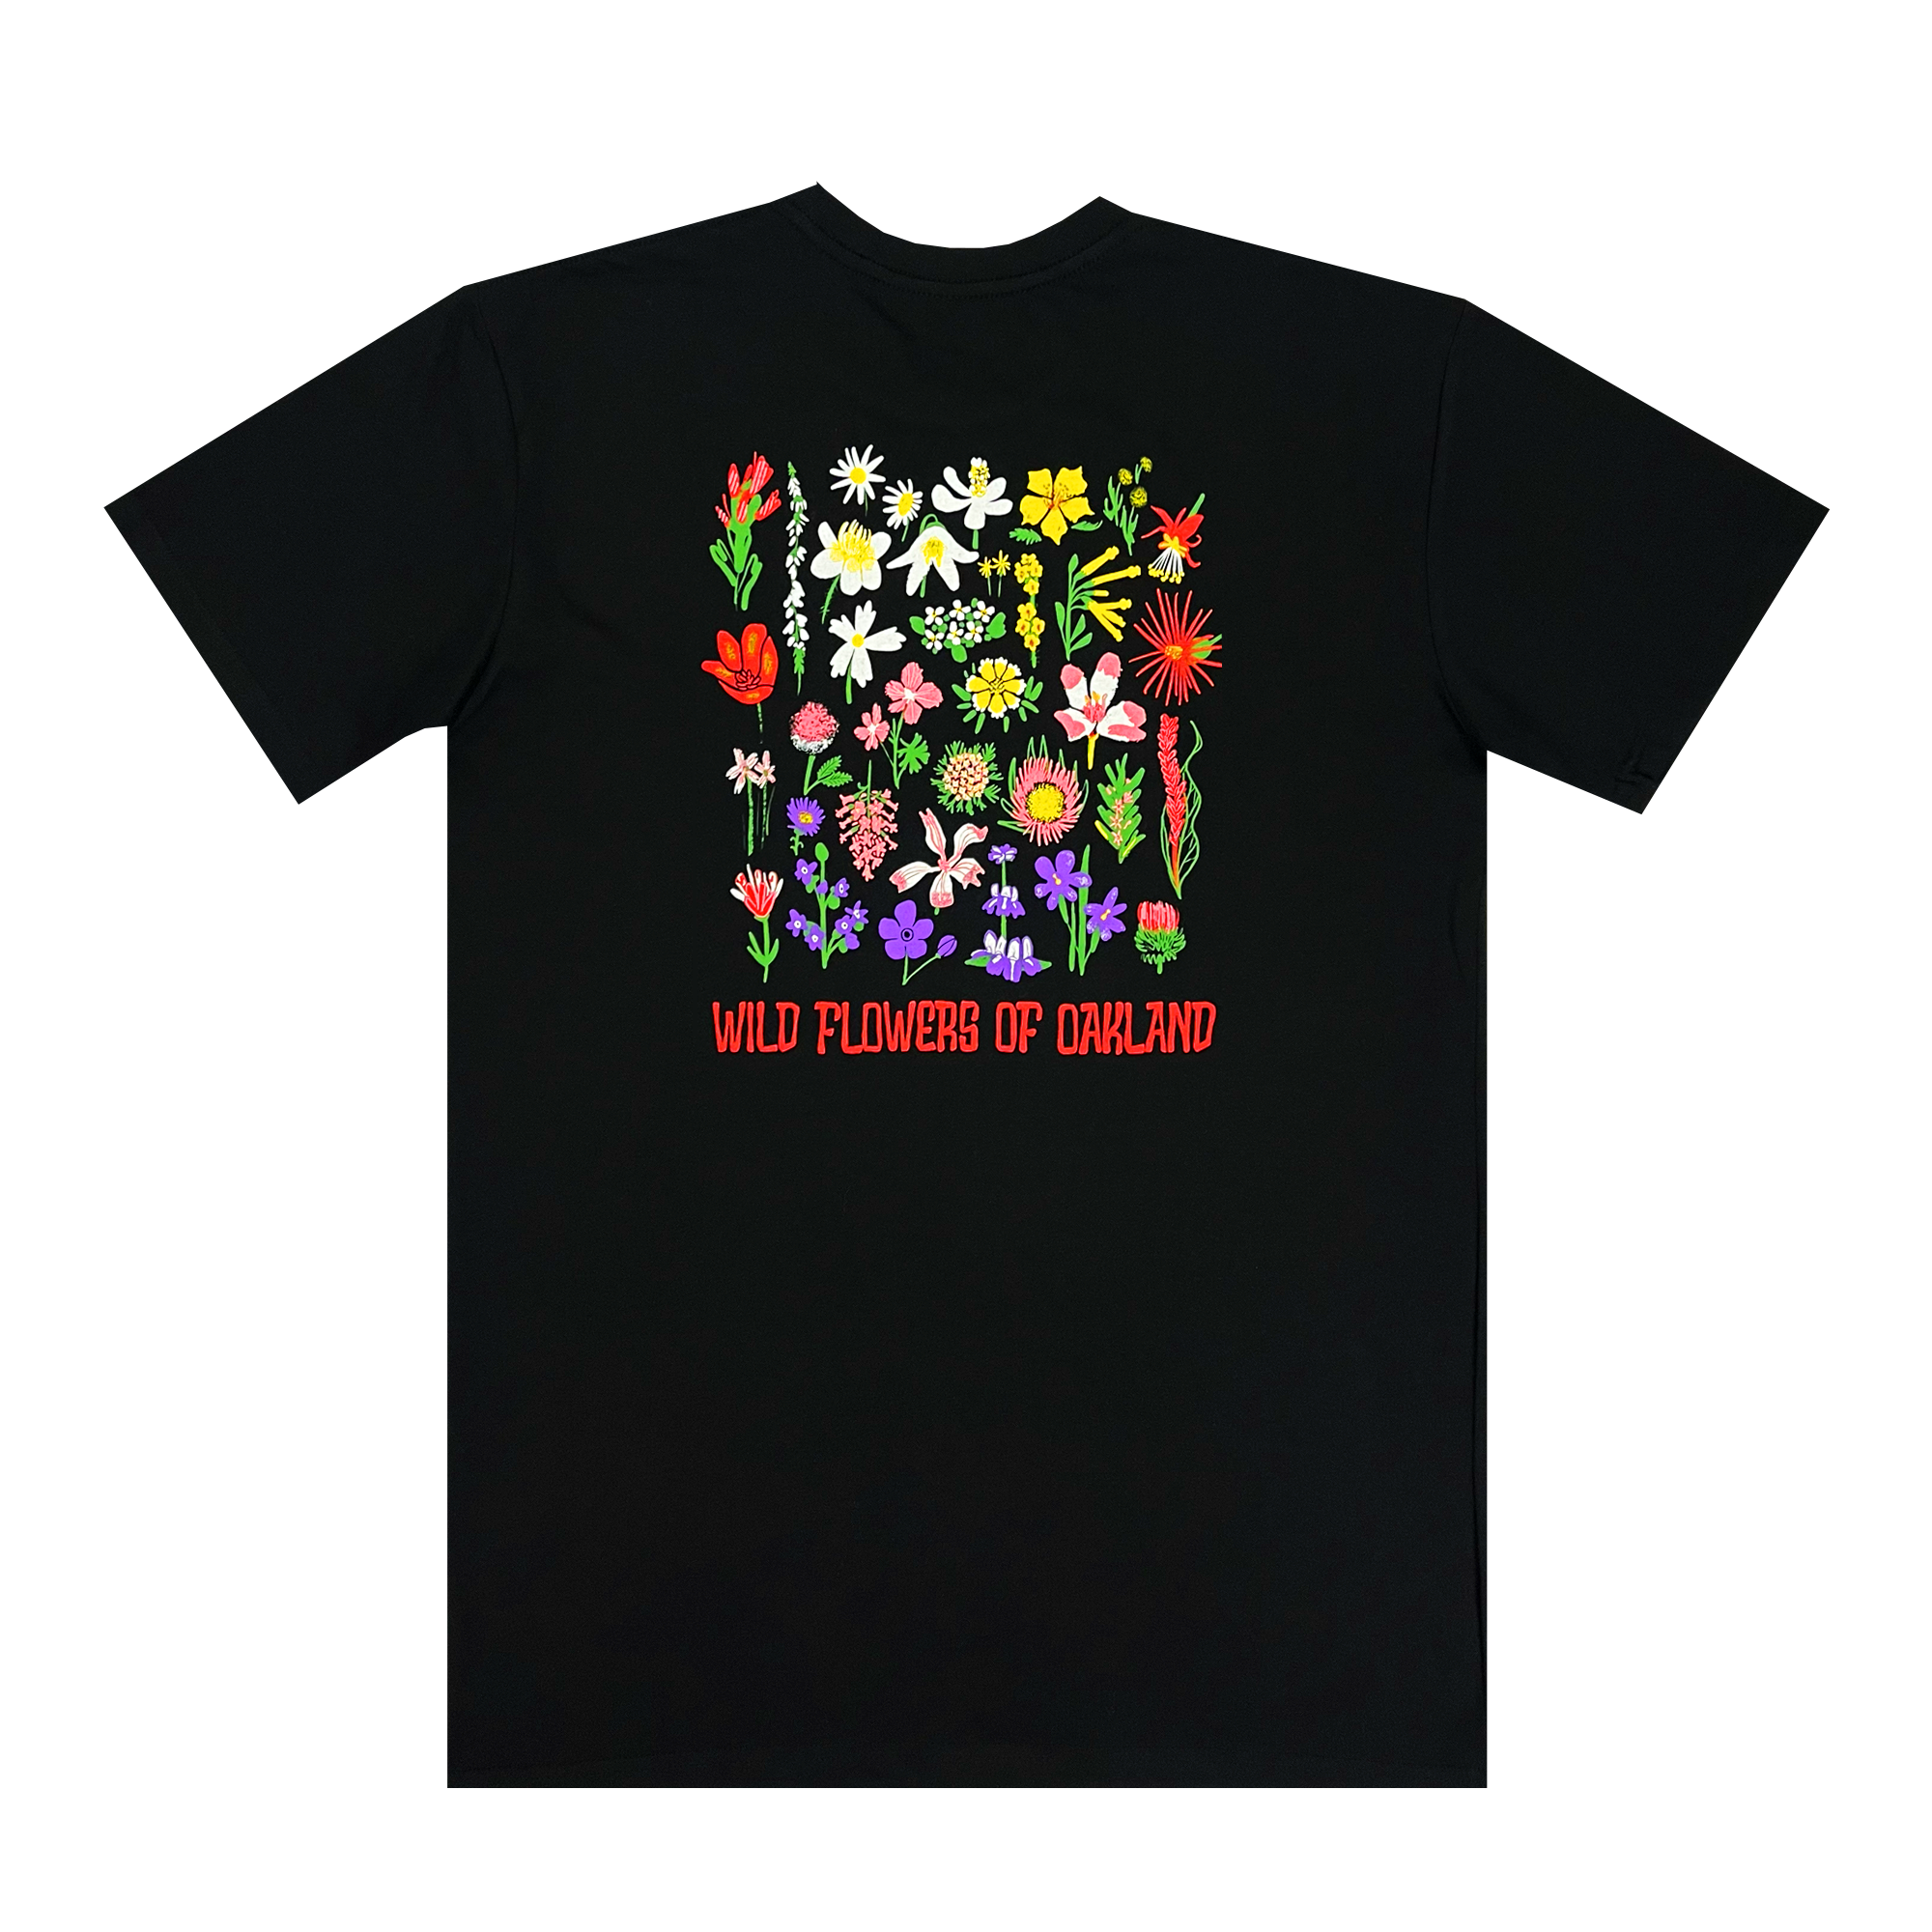 Backside view of a black t-shirt with a graphic depicting colorful wildflowers with a red WILD FLOWERS OF OAKLAND wordmark.